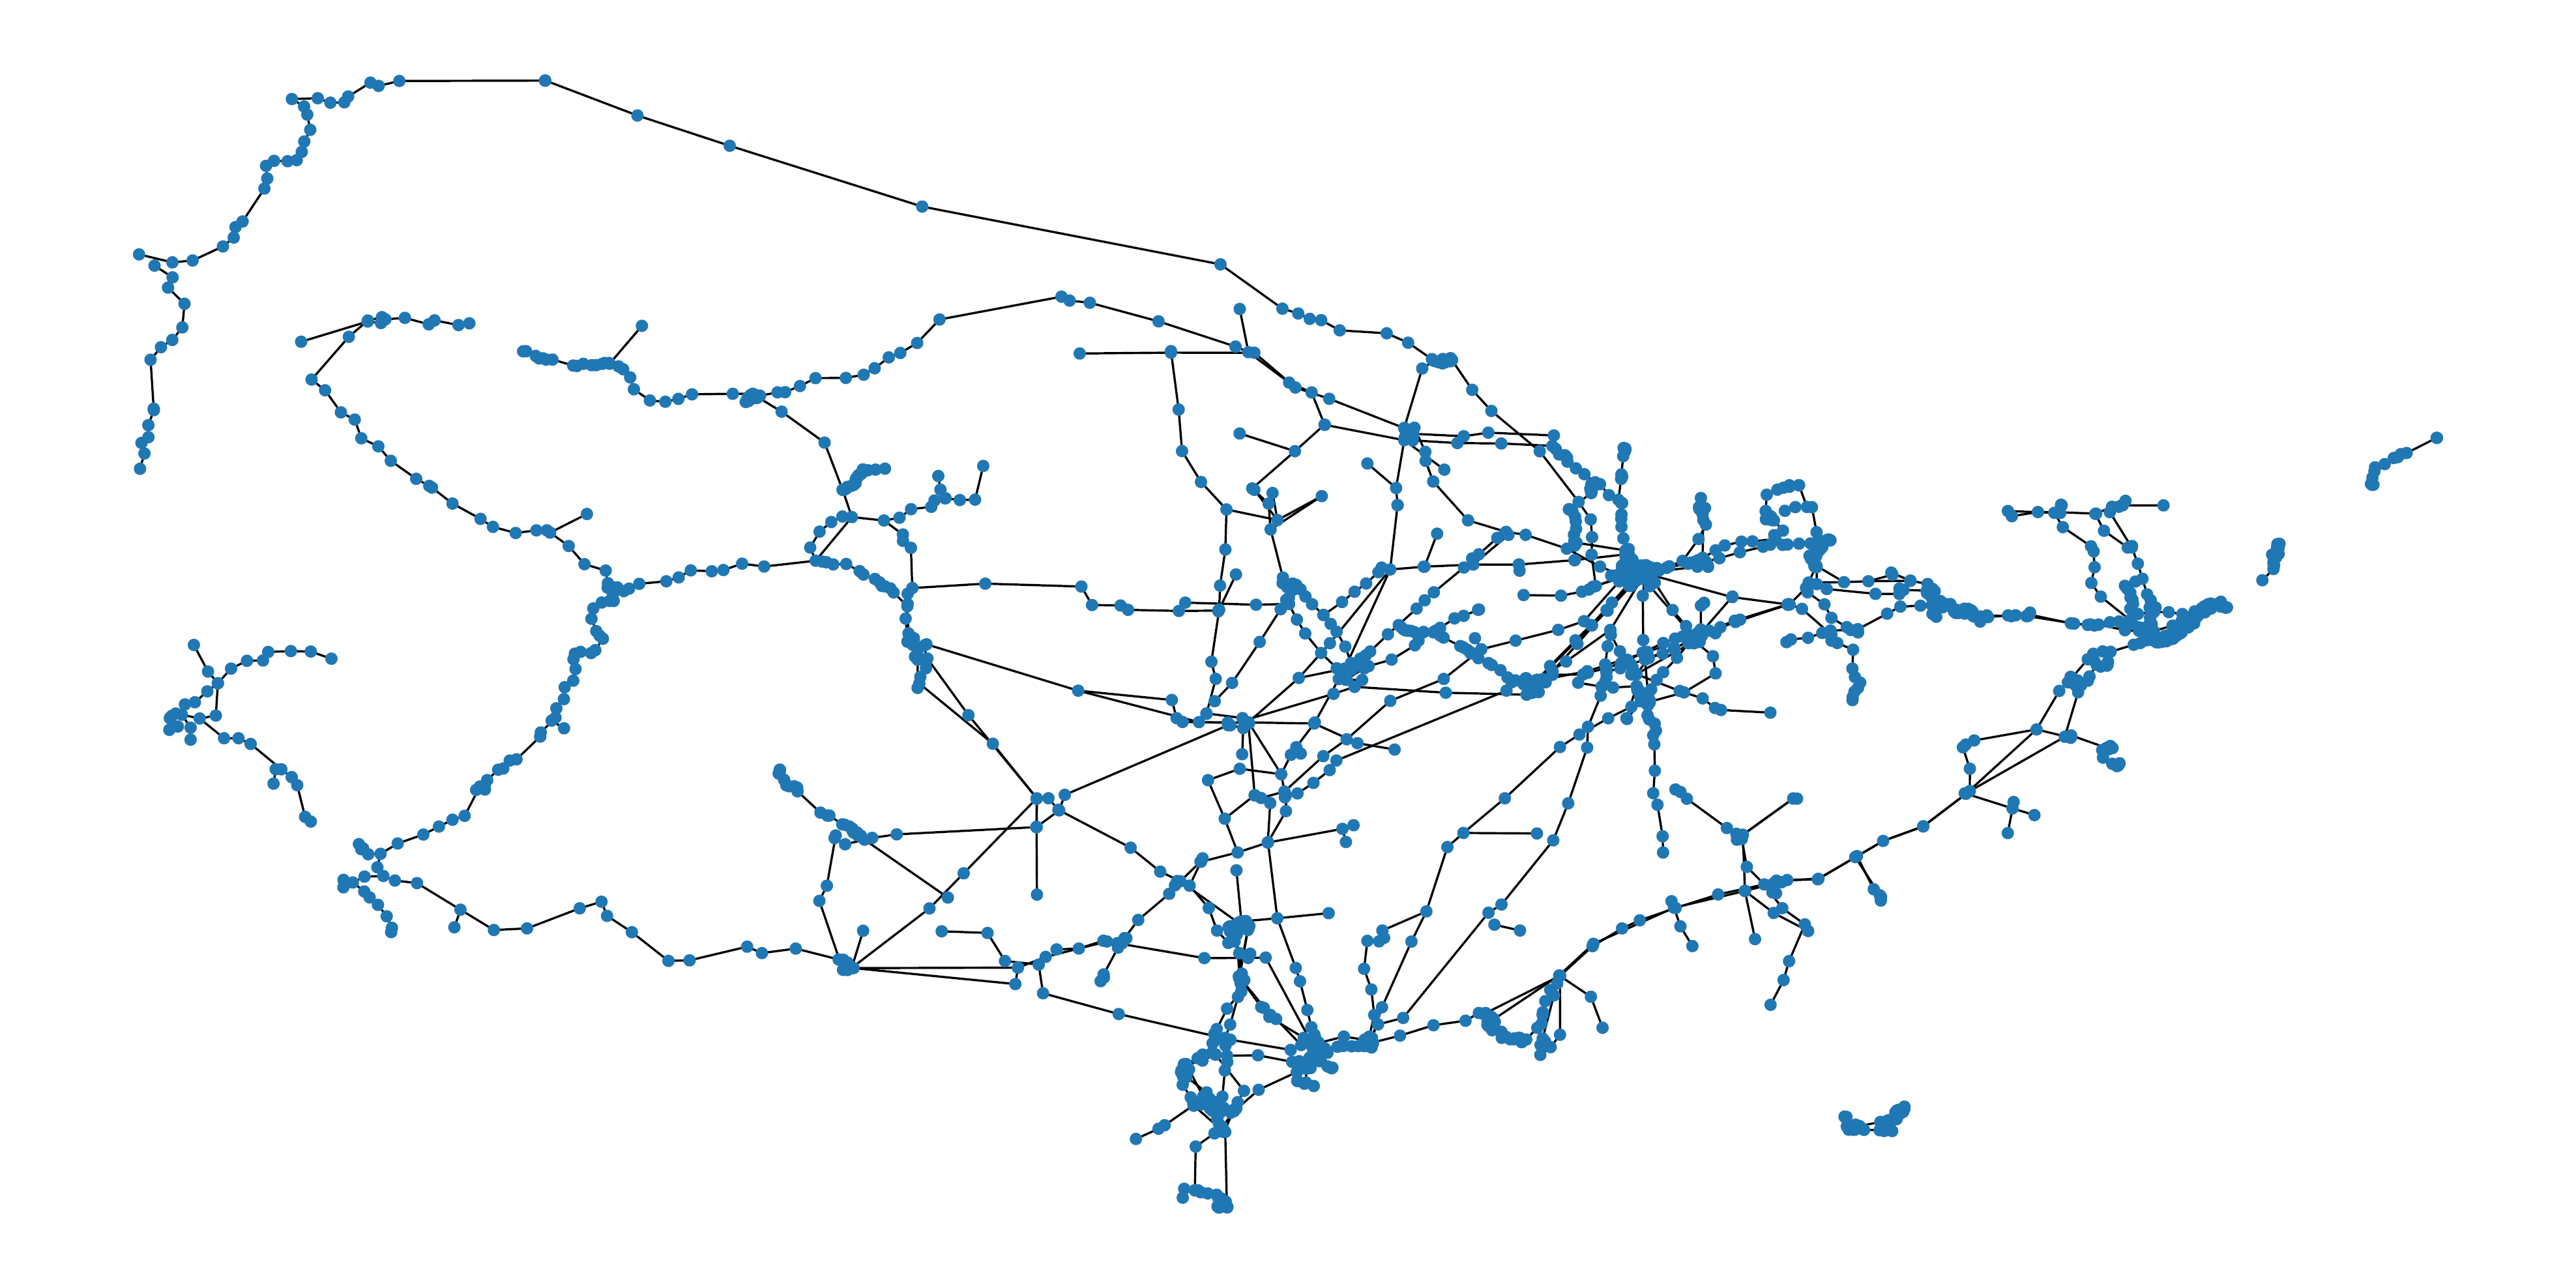 Petroleum product pipeline network, nodes colored by betweenness centrality value | Skanda Vivek